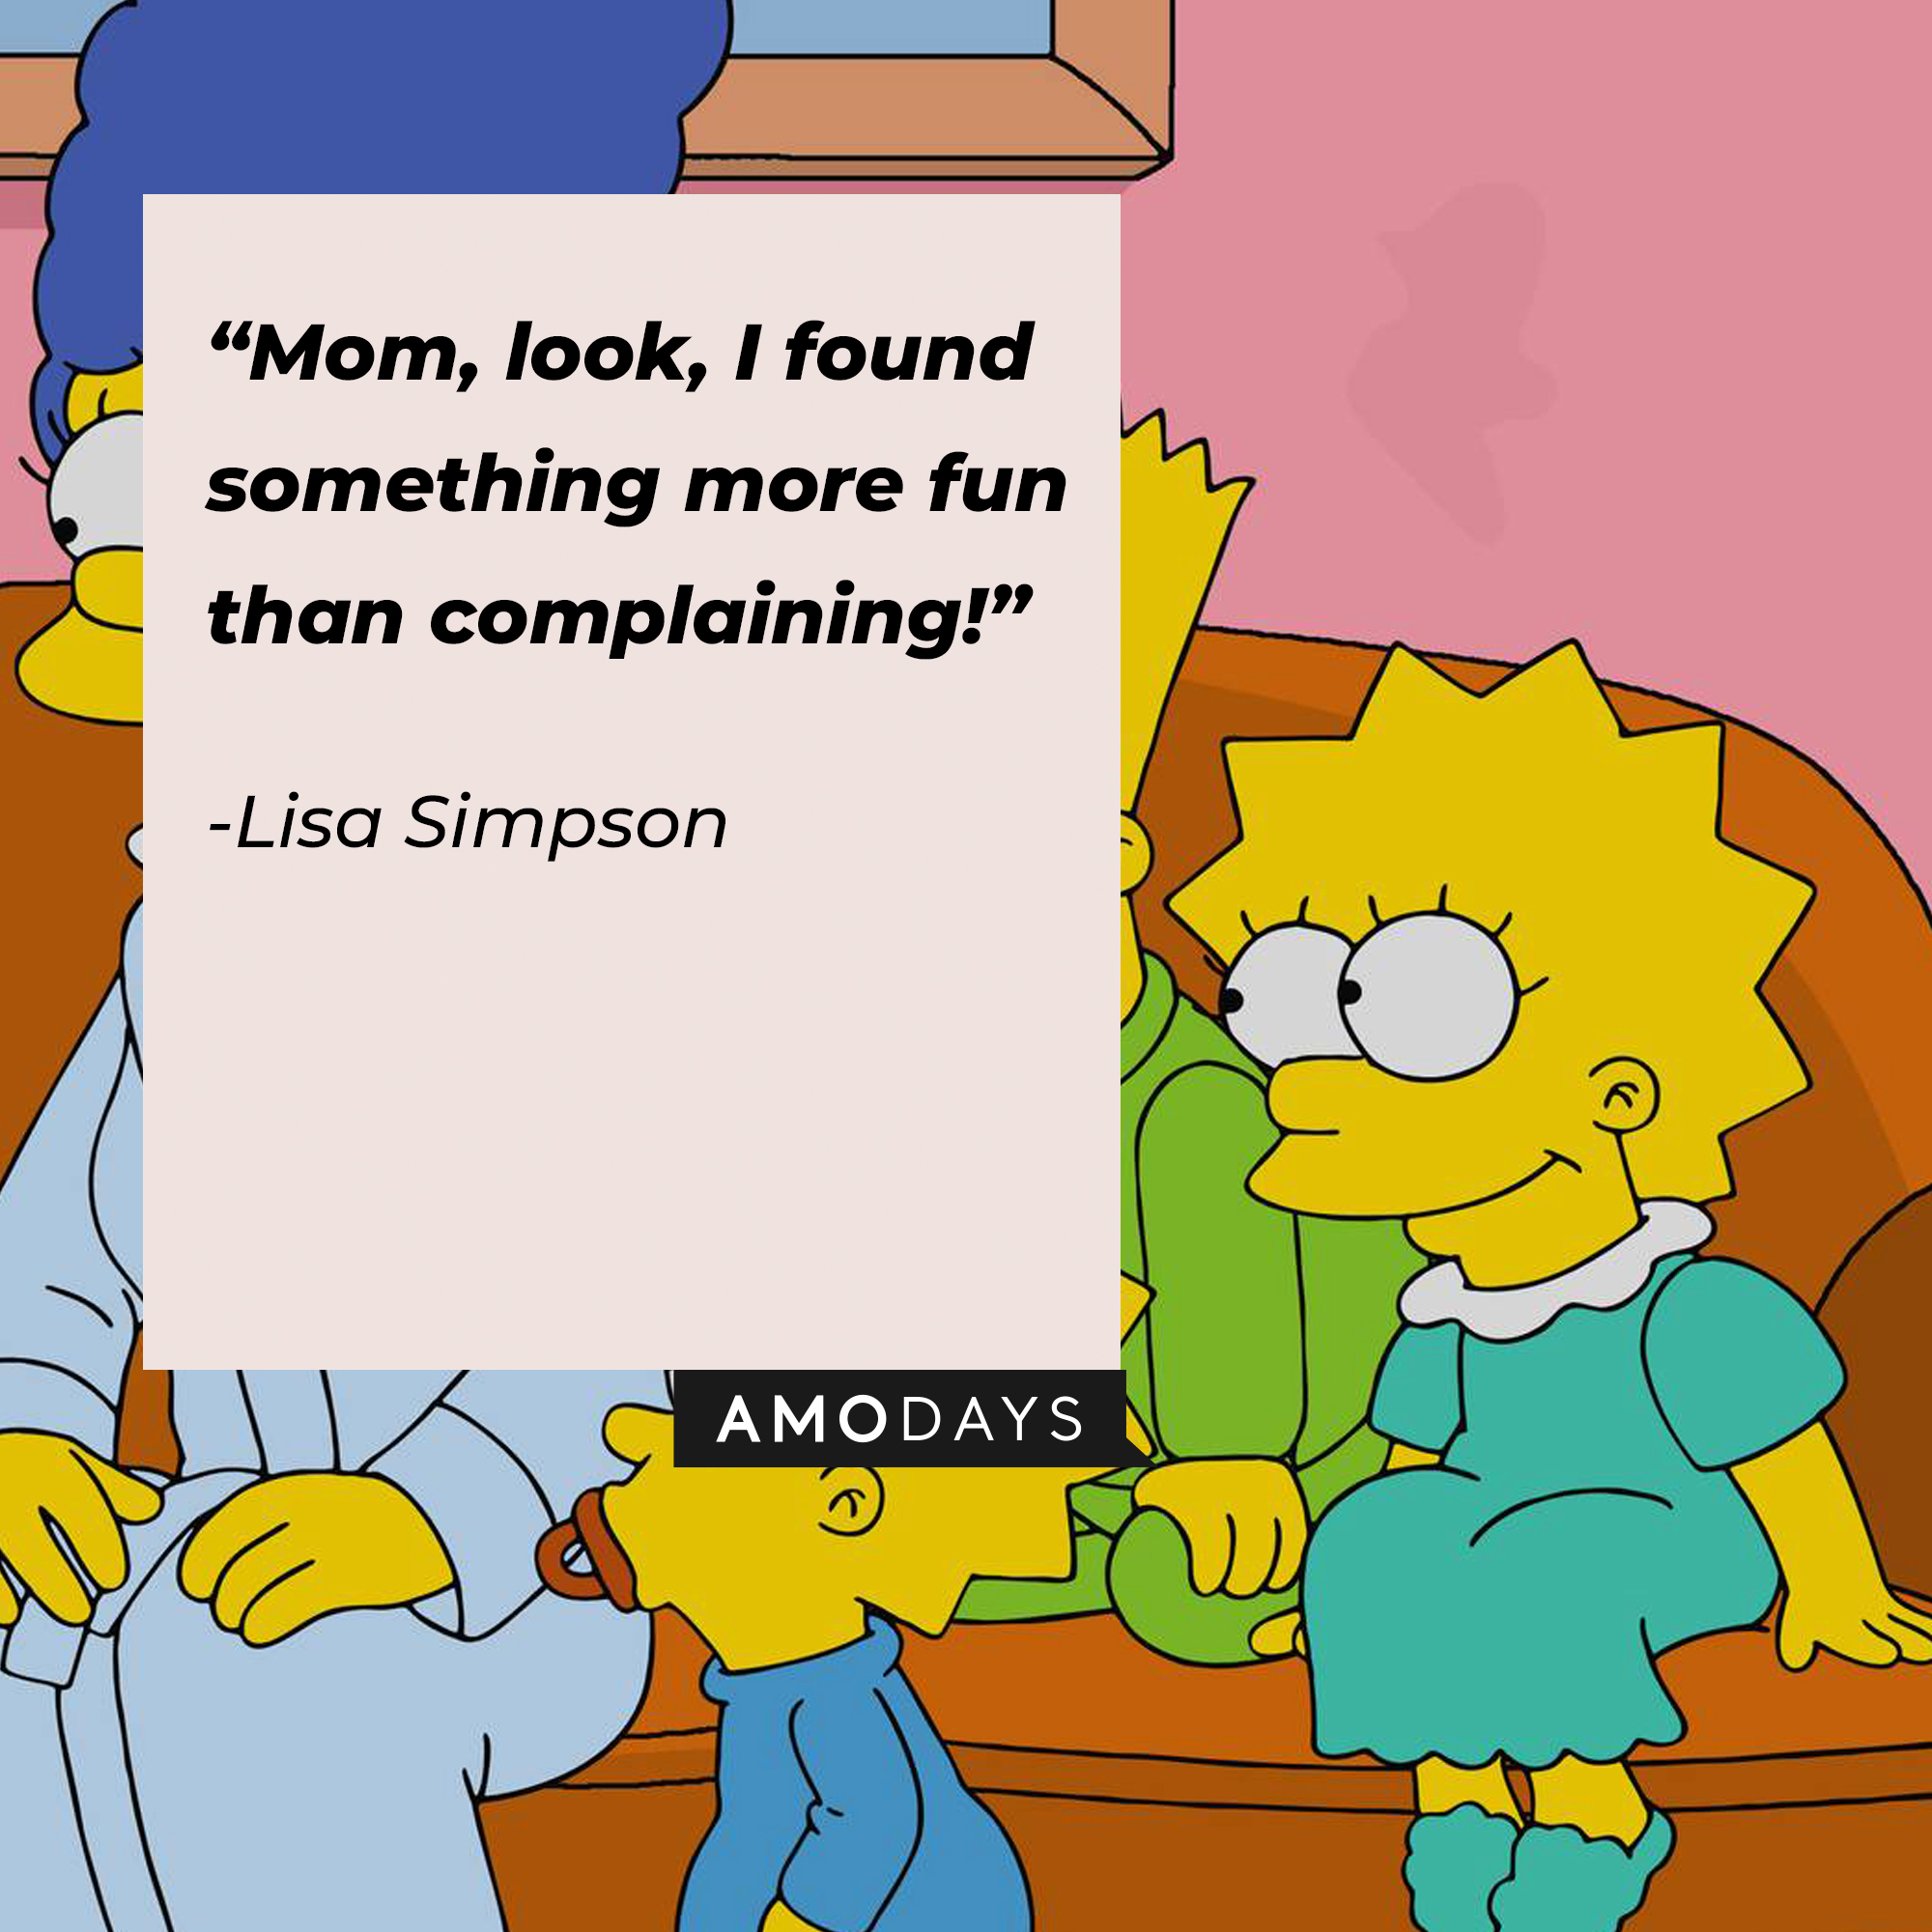 Lisa Simpson, with her quote: “Mom, look, I found something more fun than complaining!” | Source: facebook.com/TheSimpsons